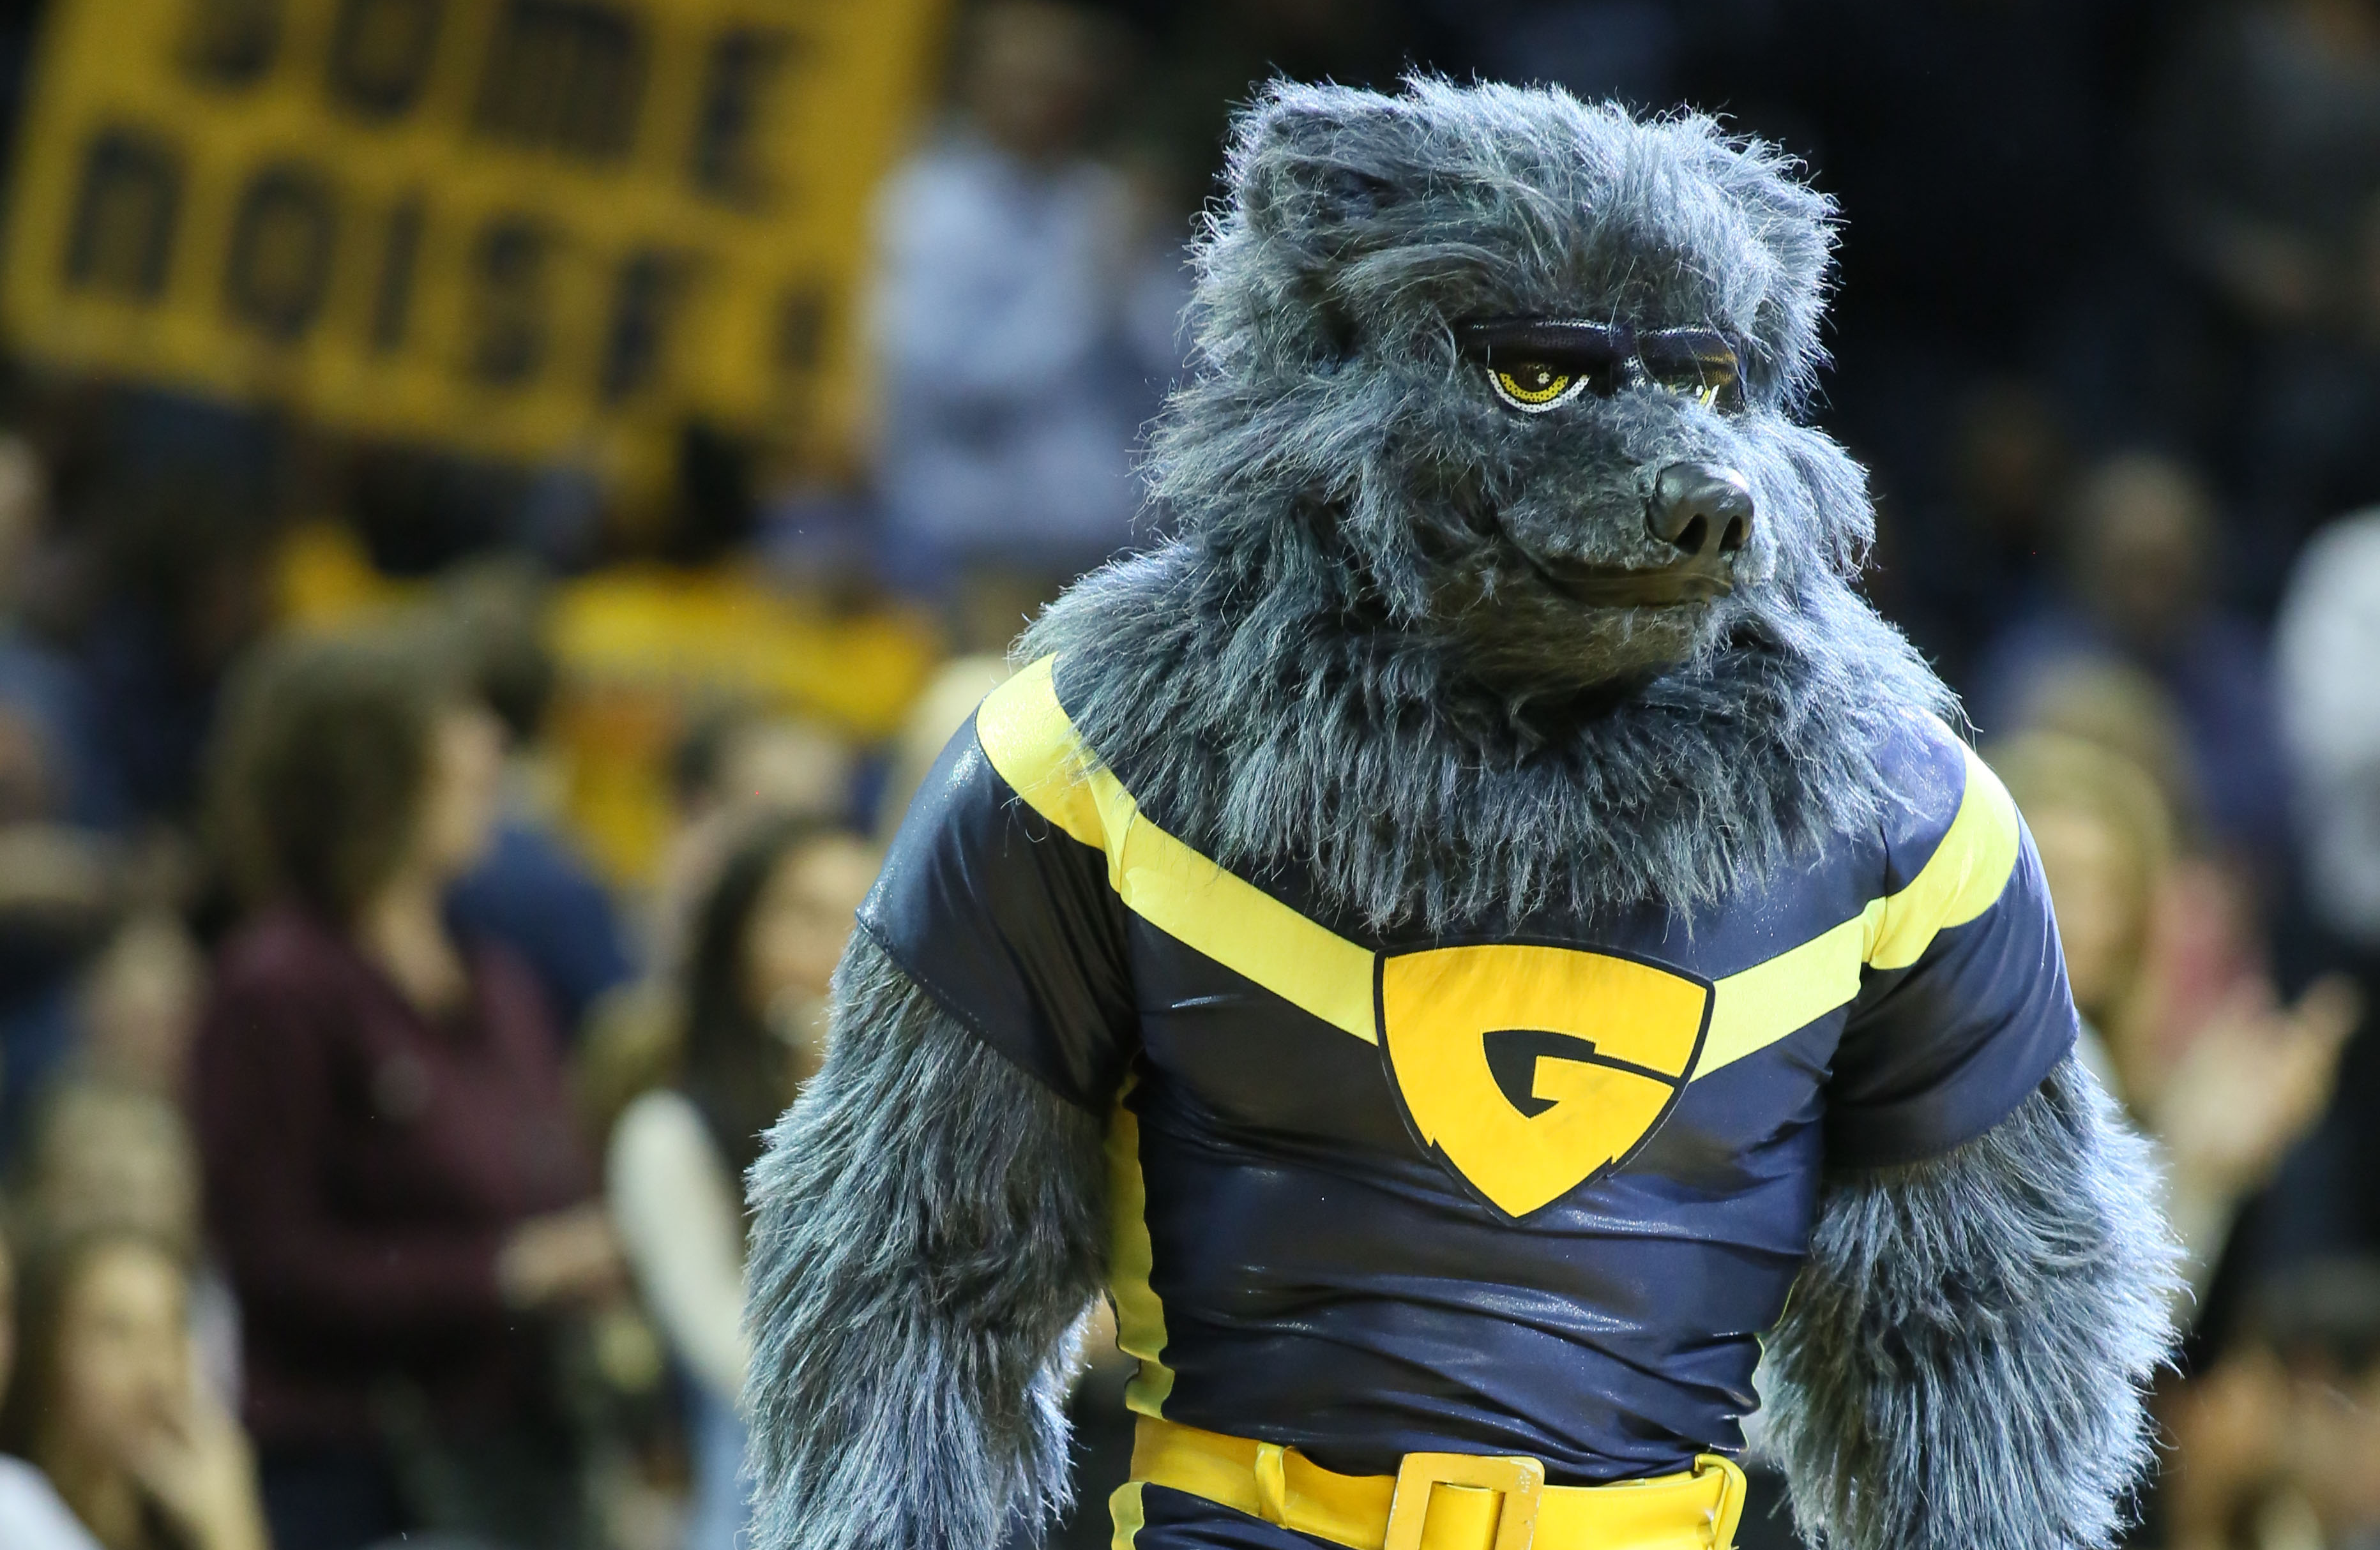 Memphis Grizzlies mascot Grizz through the years